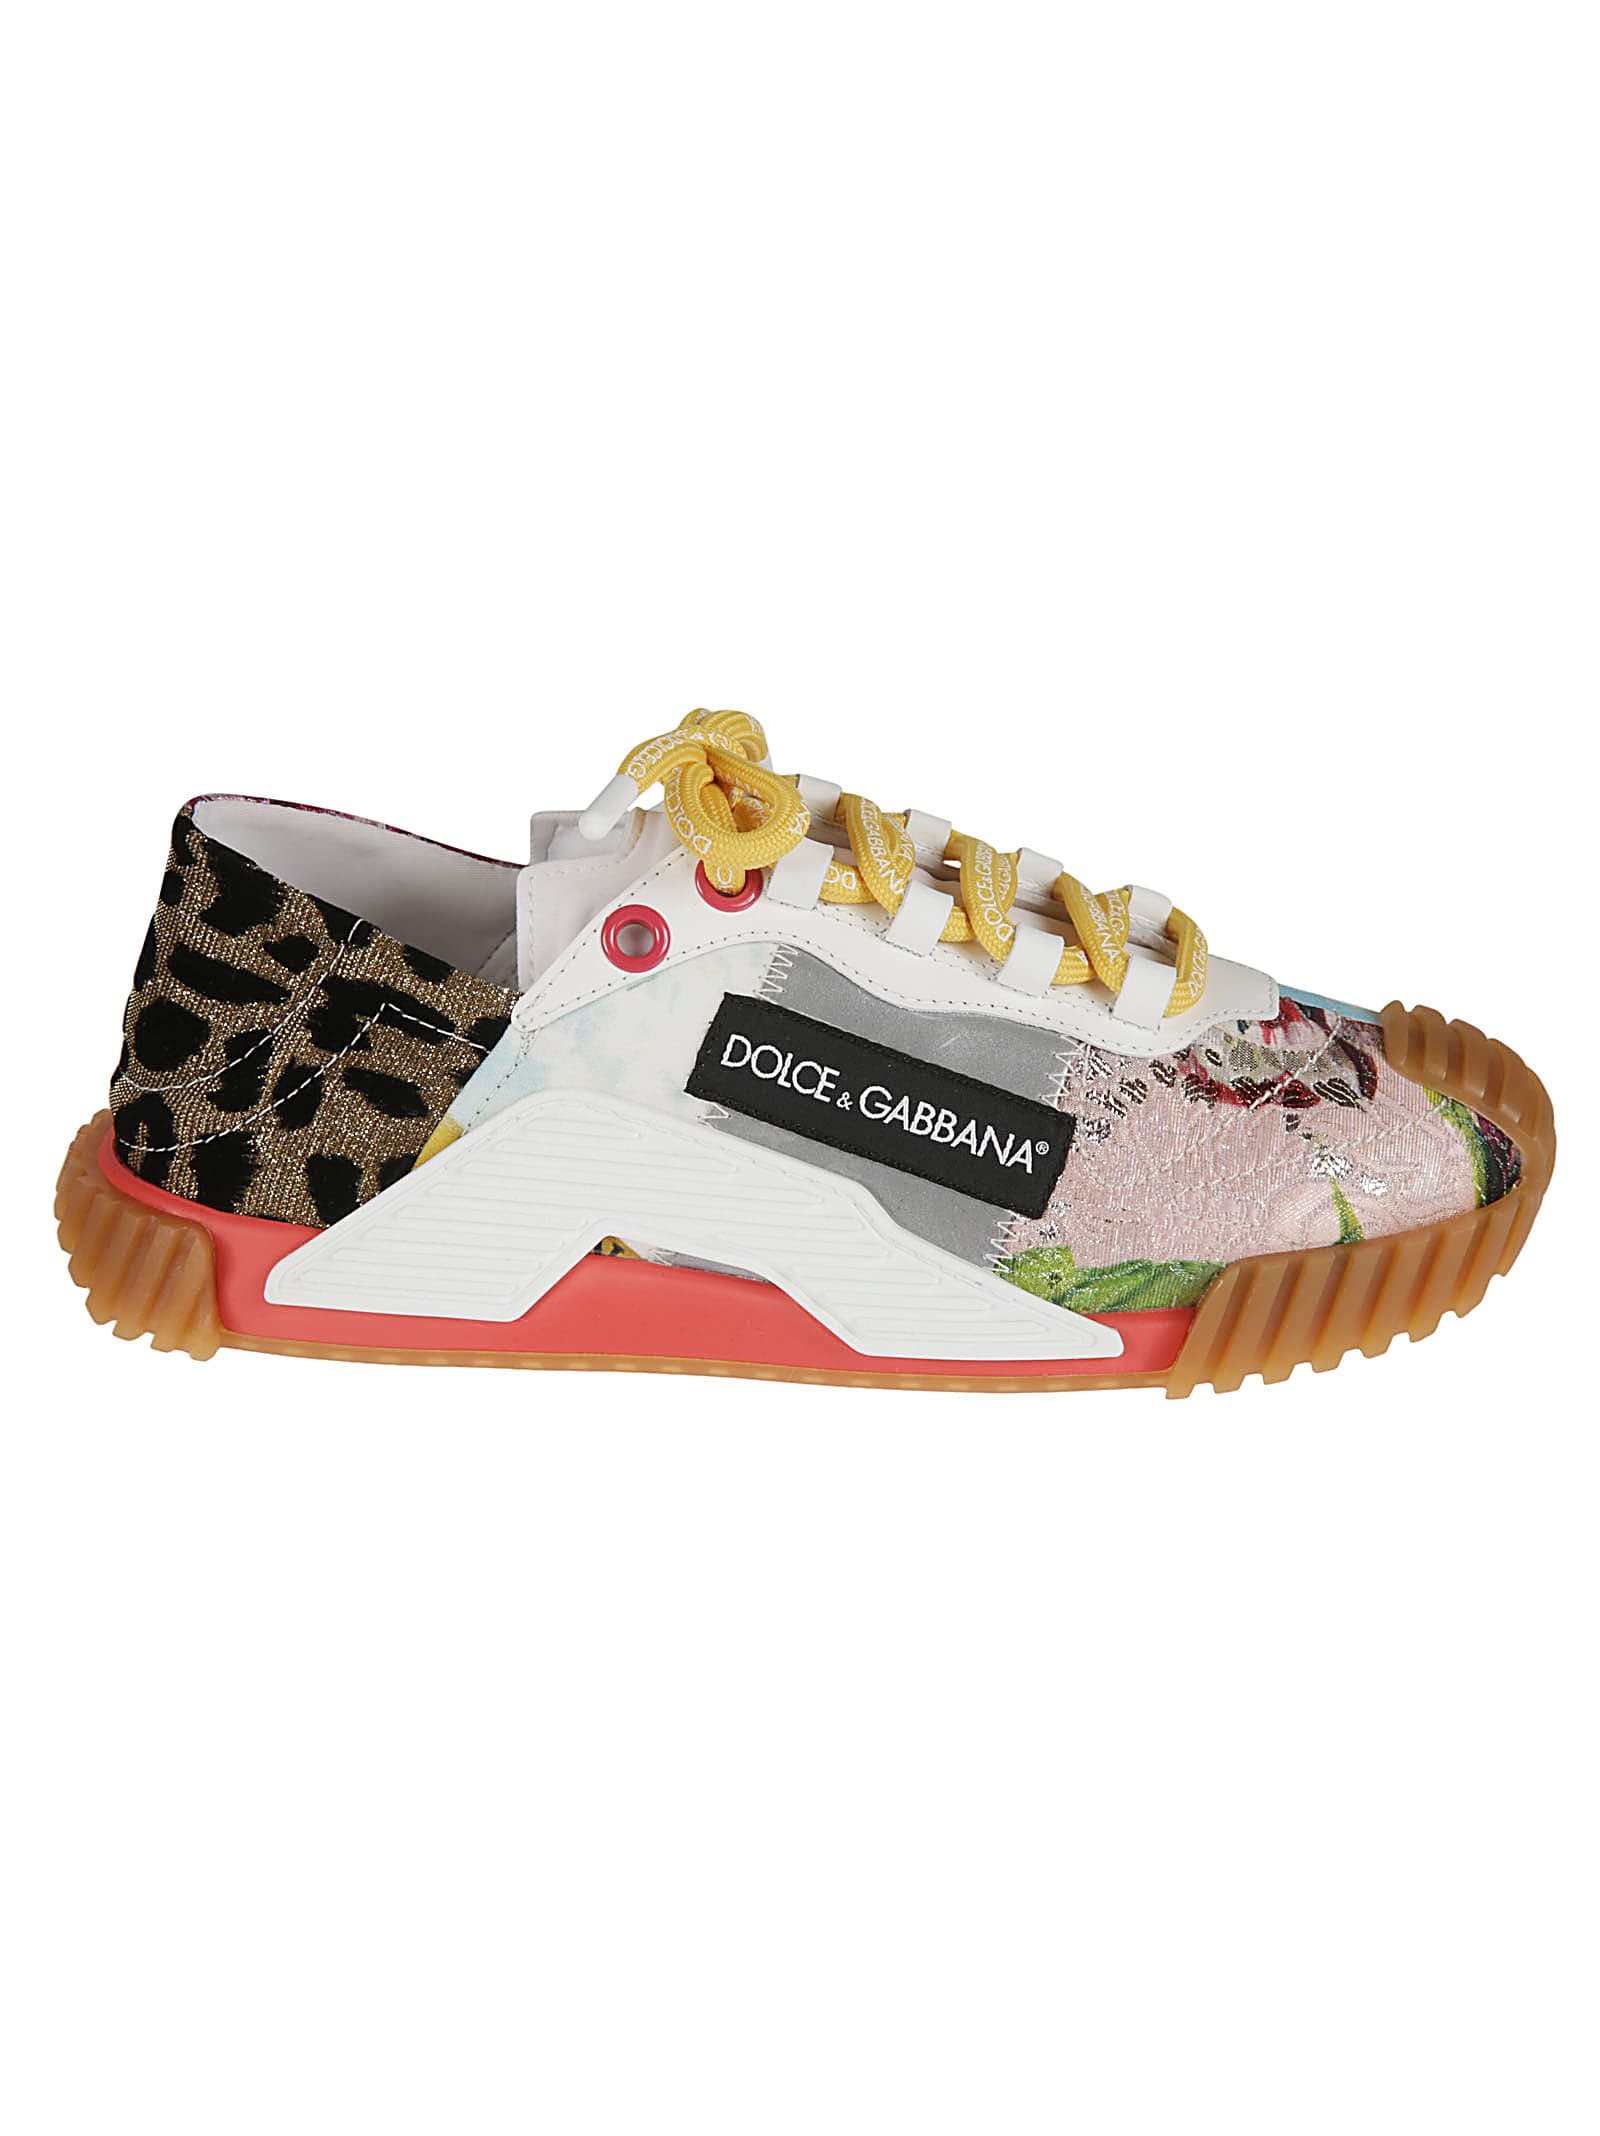 Buy Dolce & Gabbana Logo Patched Paneled Sneakers online, shop Dolce & Gabbana shoes with free shipping